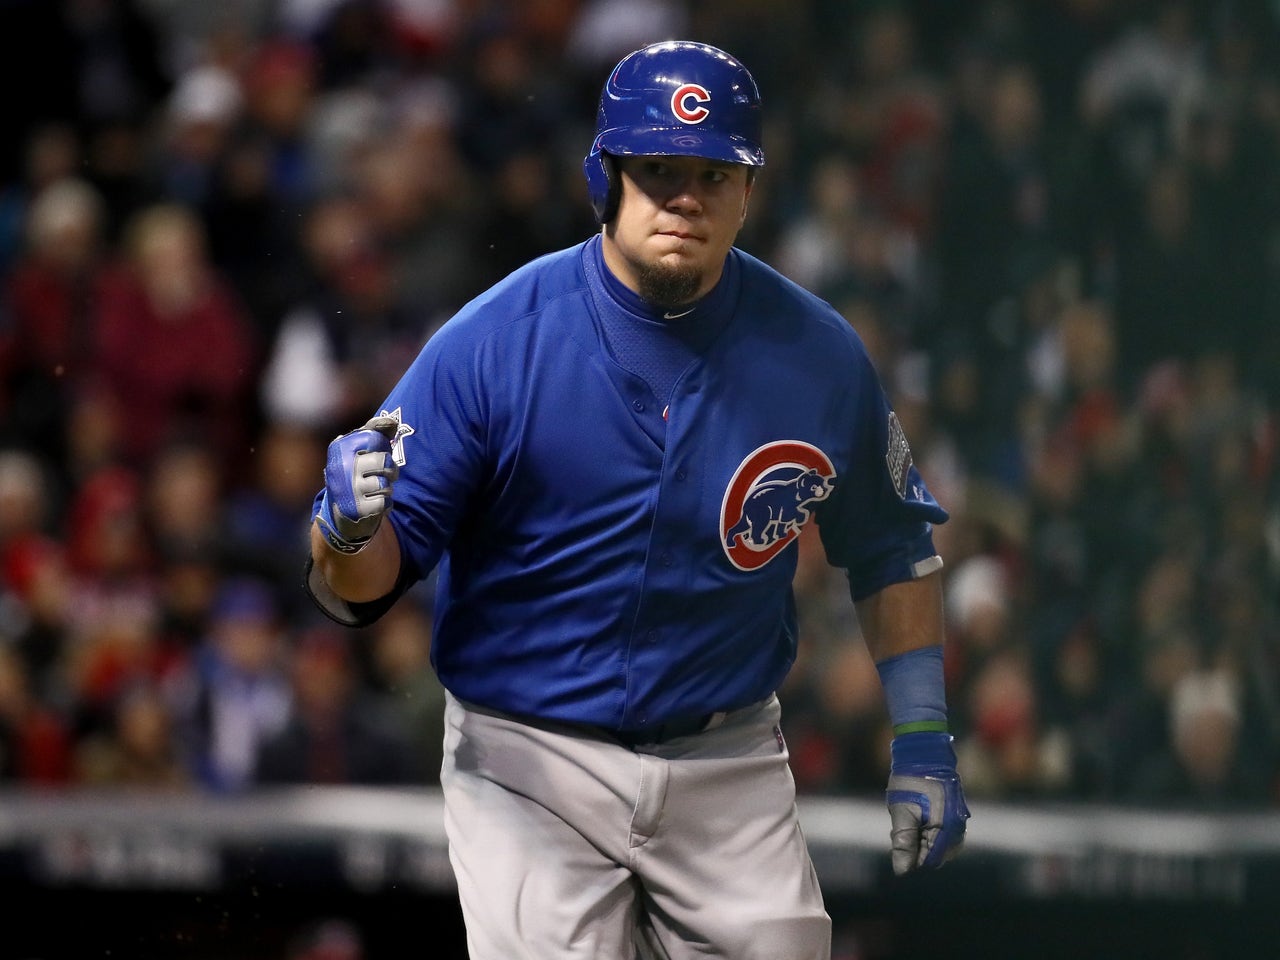 World Series: Incredible Story Behind Kyle Schwarber's Green Wristband